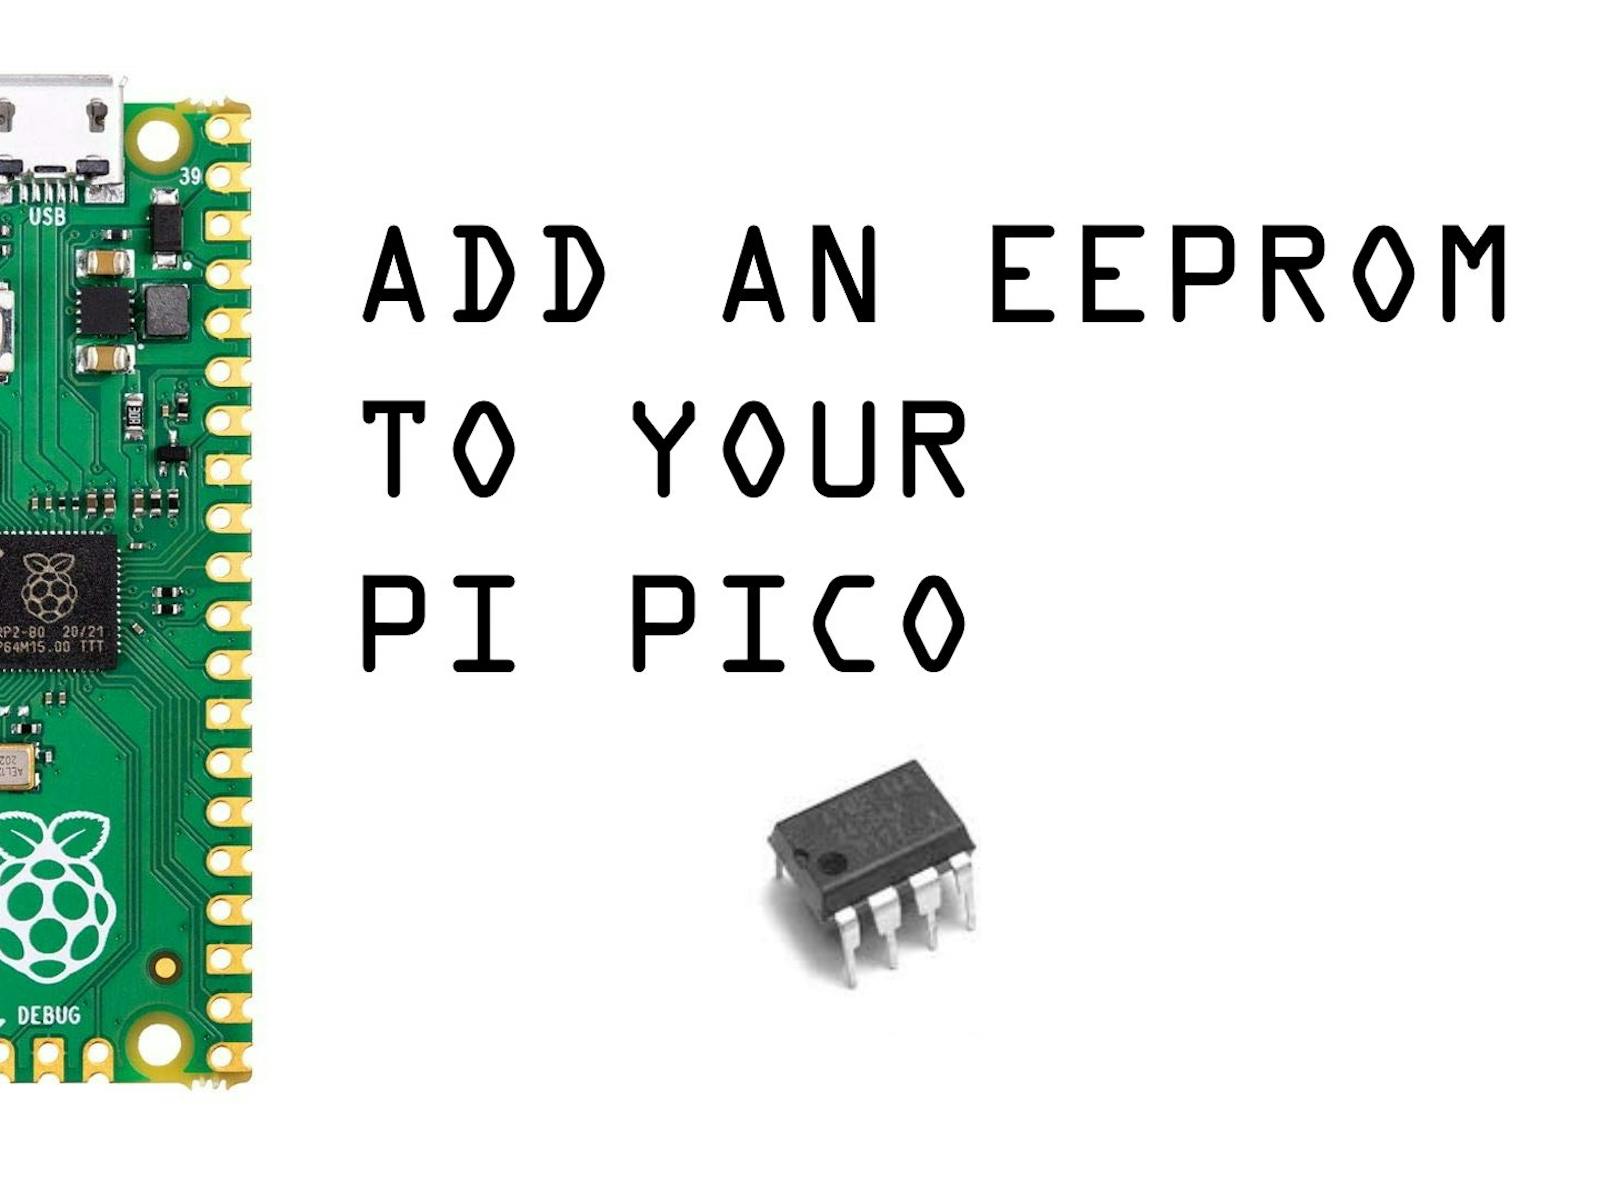 eeprom is write-protected